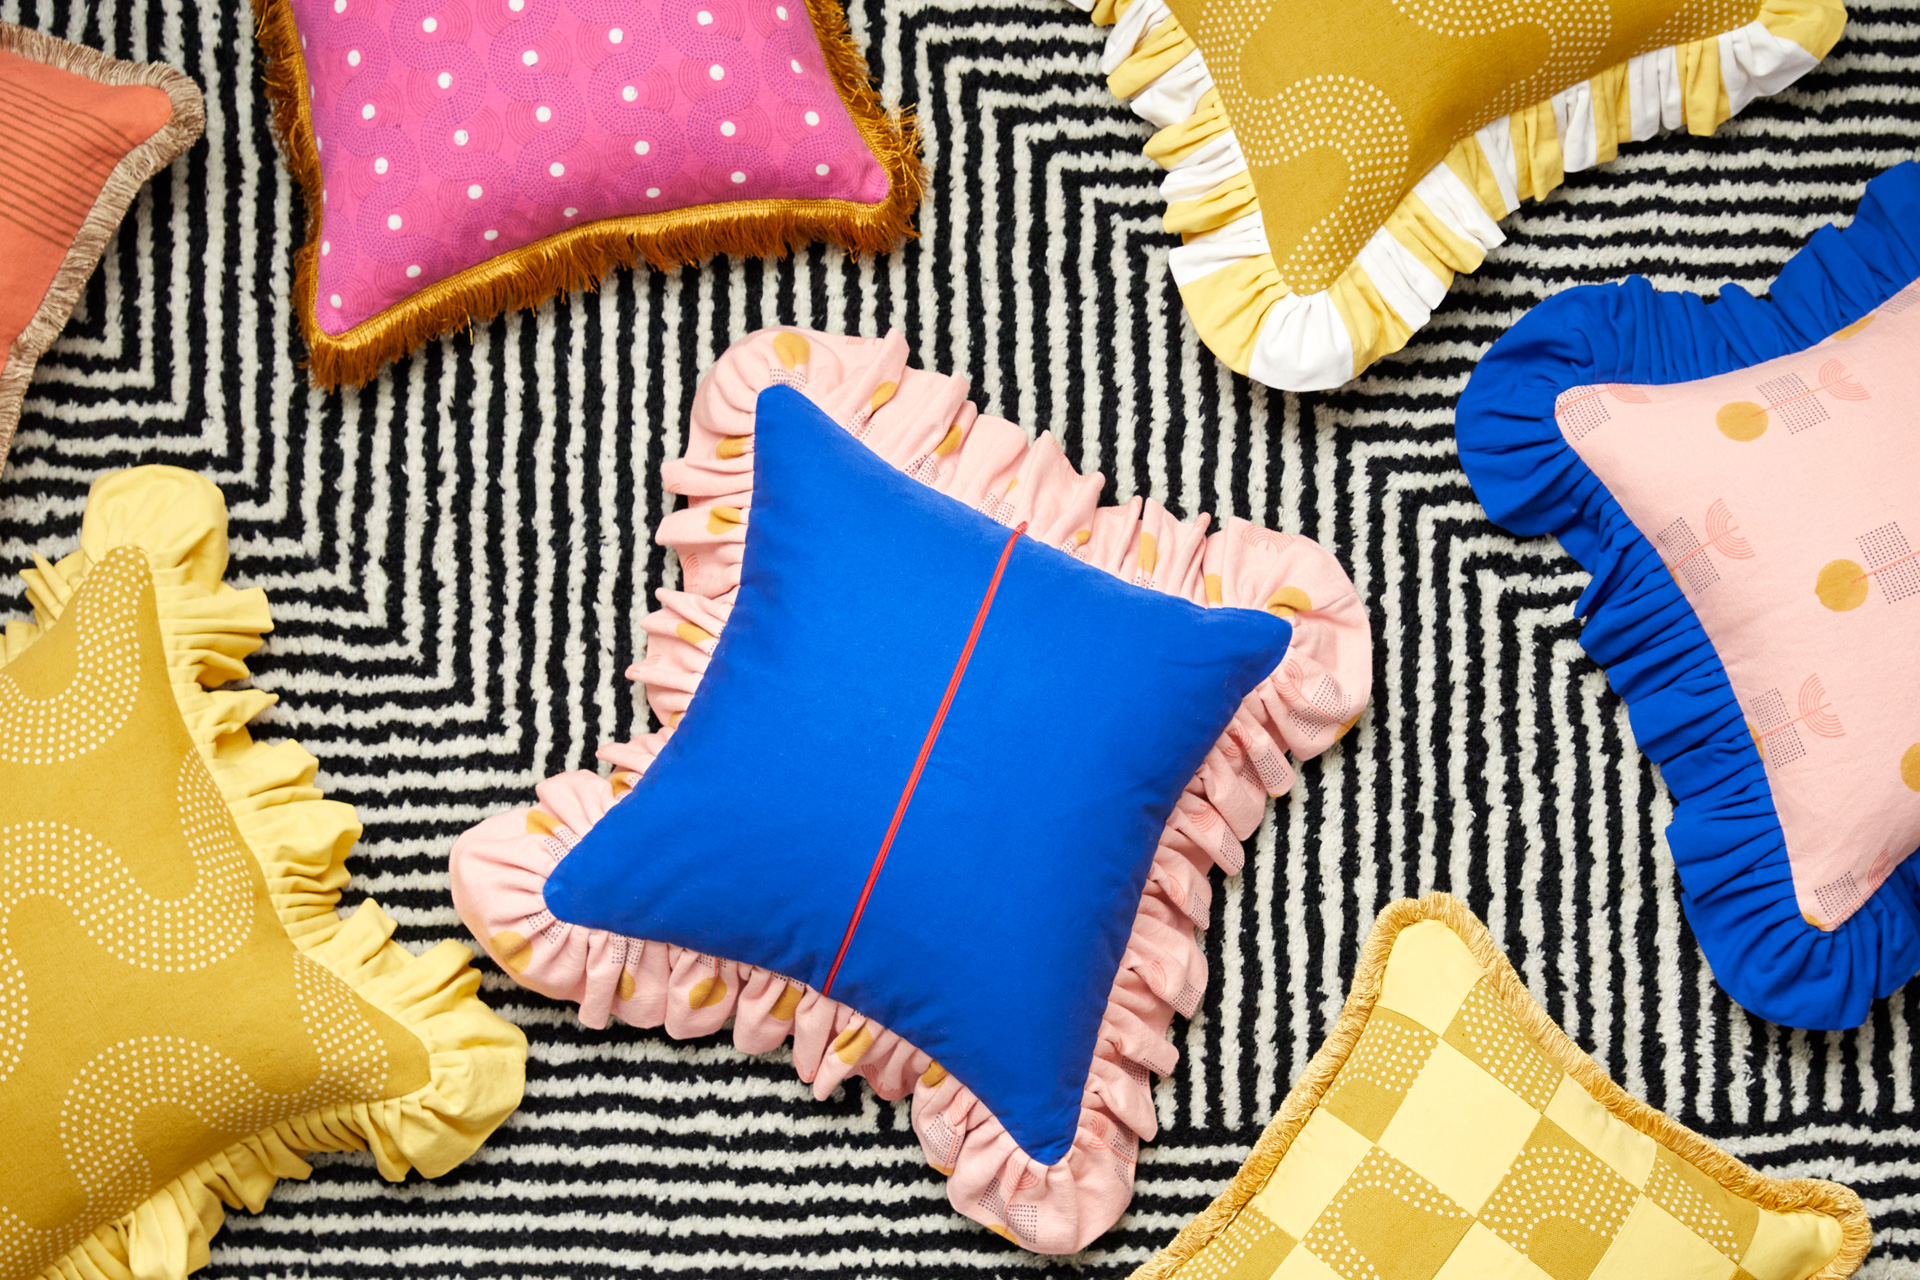 Brightly coloured cushions by In Casa by Paboy